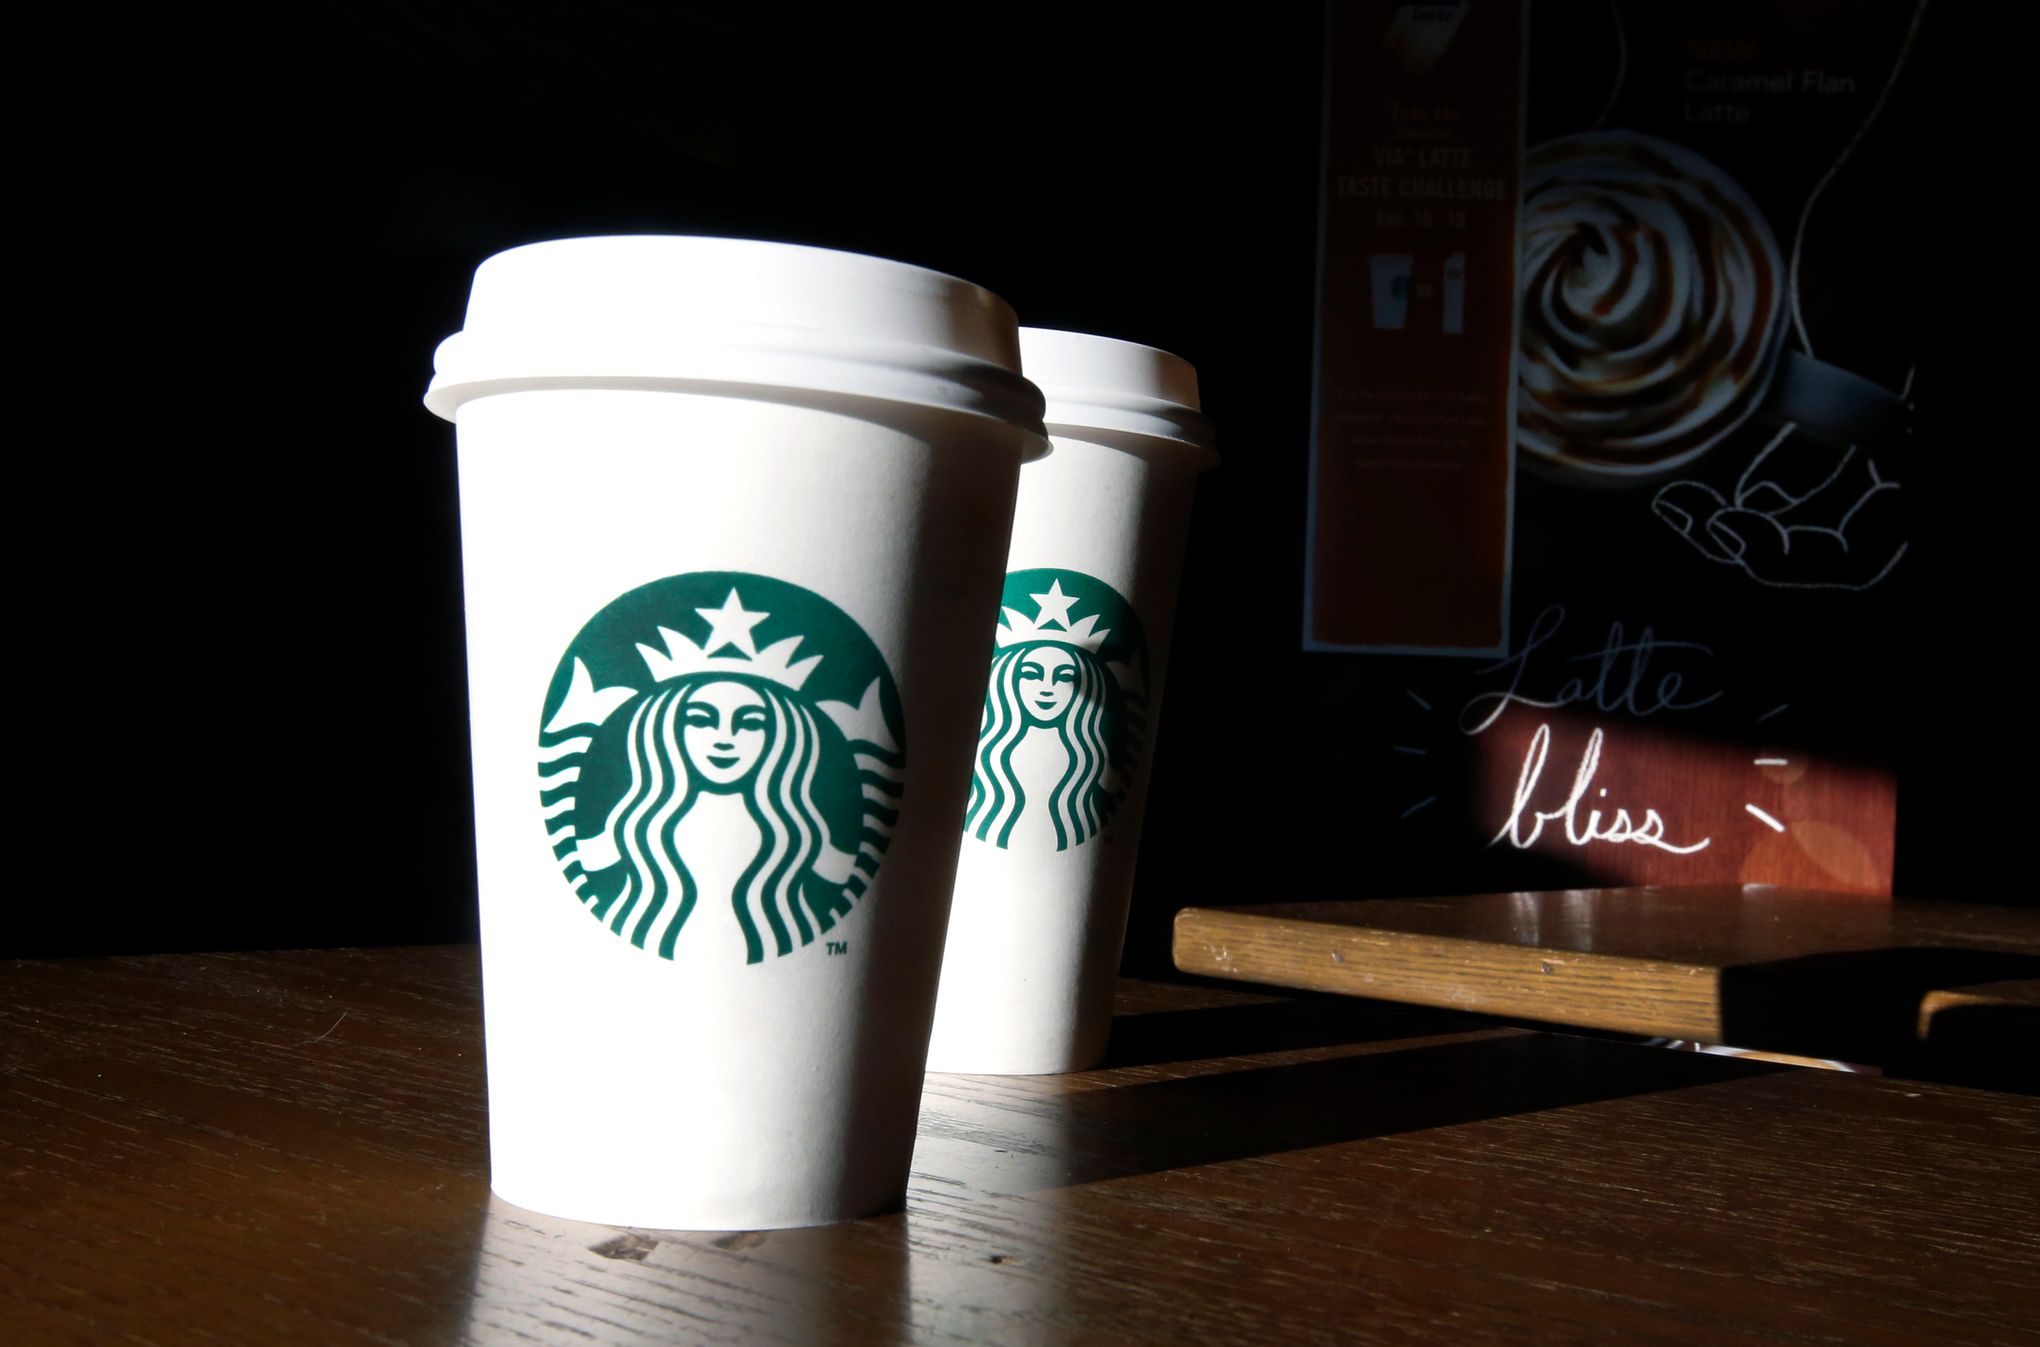 6 things Starbucks learned from its reusable cup experiments